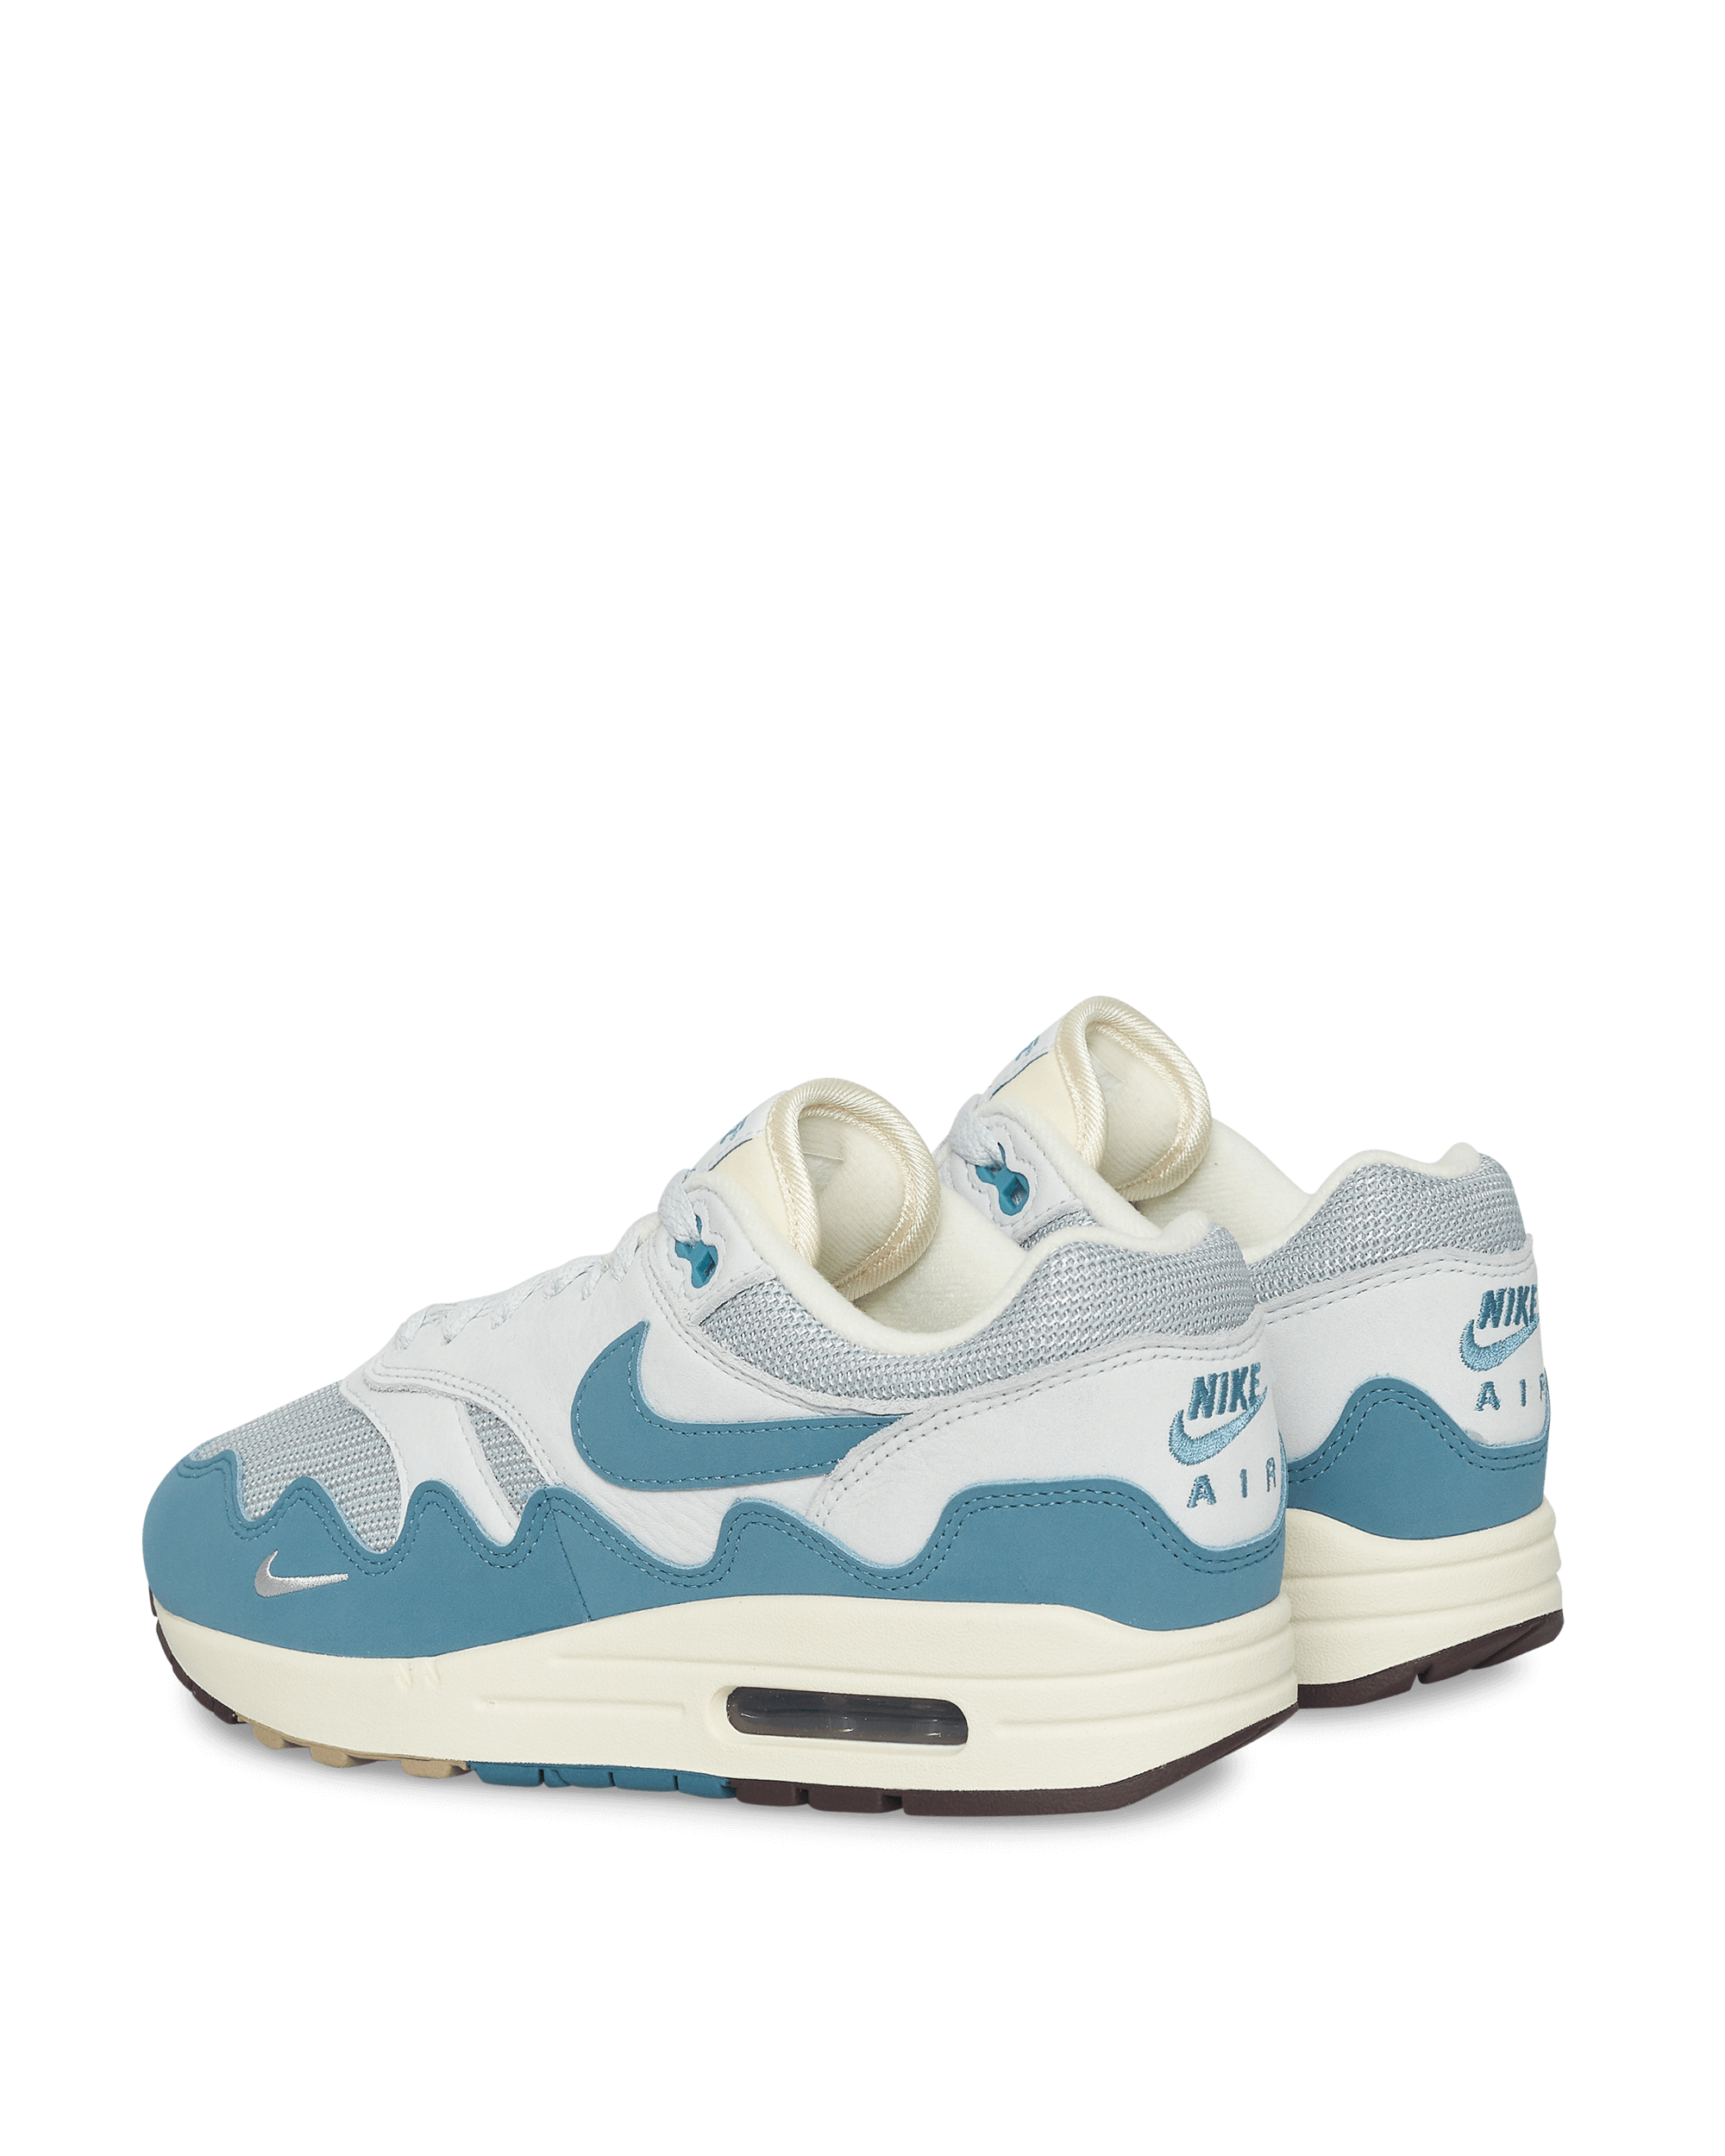 Nike Special Project Air Max 1/ P Metallic Silver/Noise Aqua Sneakers Low DH1348-004